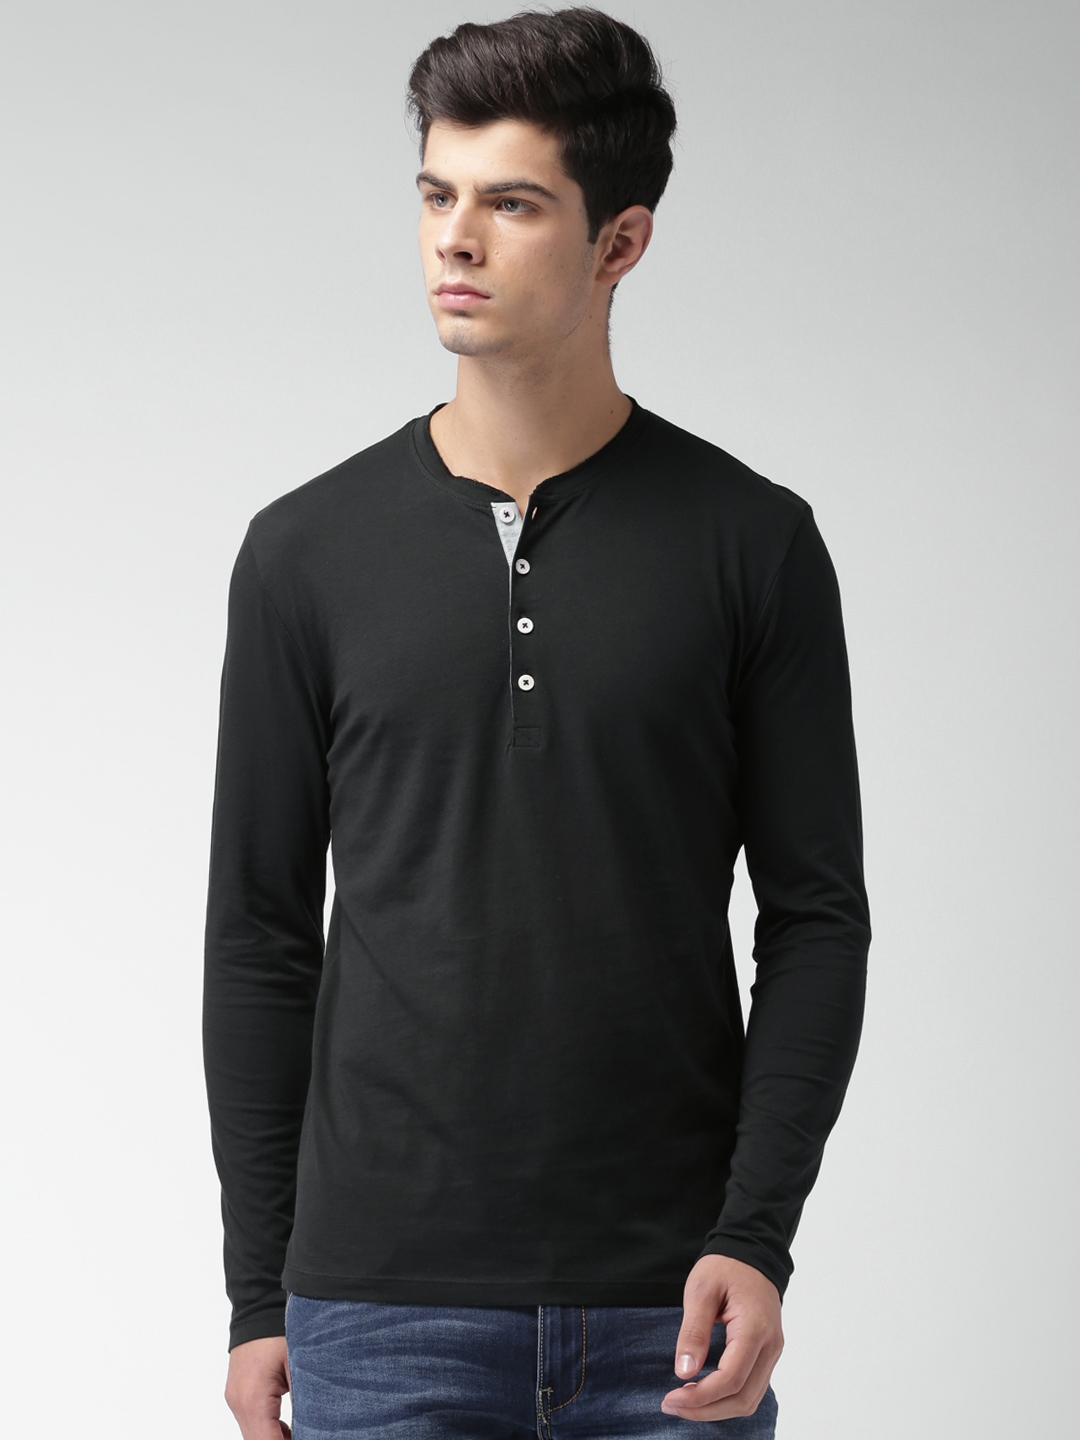 Buy SELECTED Black Henley Pure Cotton T Shirt - Tshirts for Men 1428933 ...